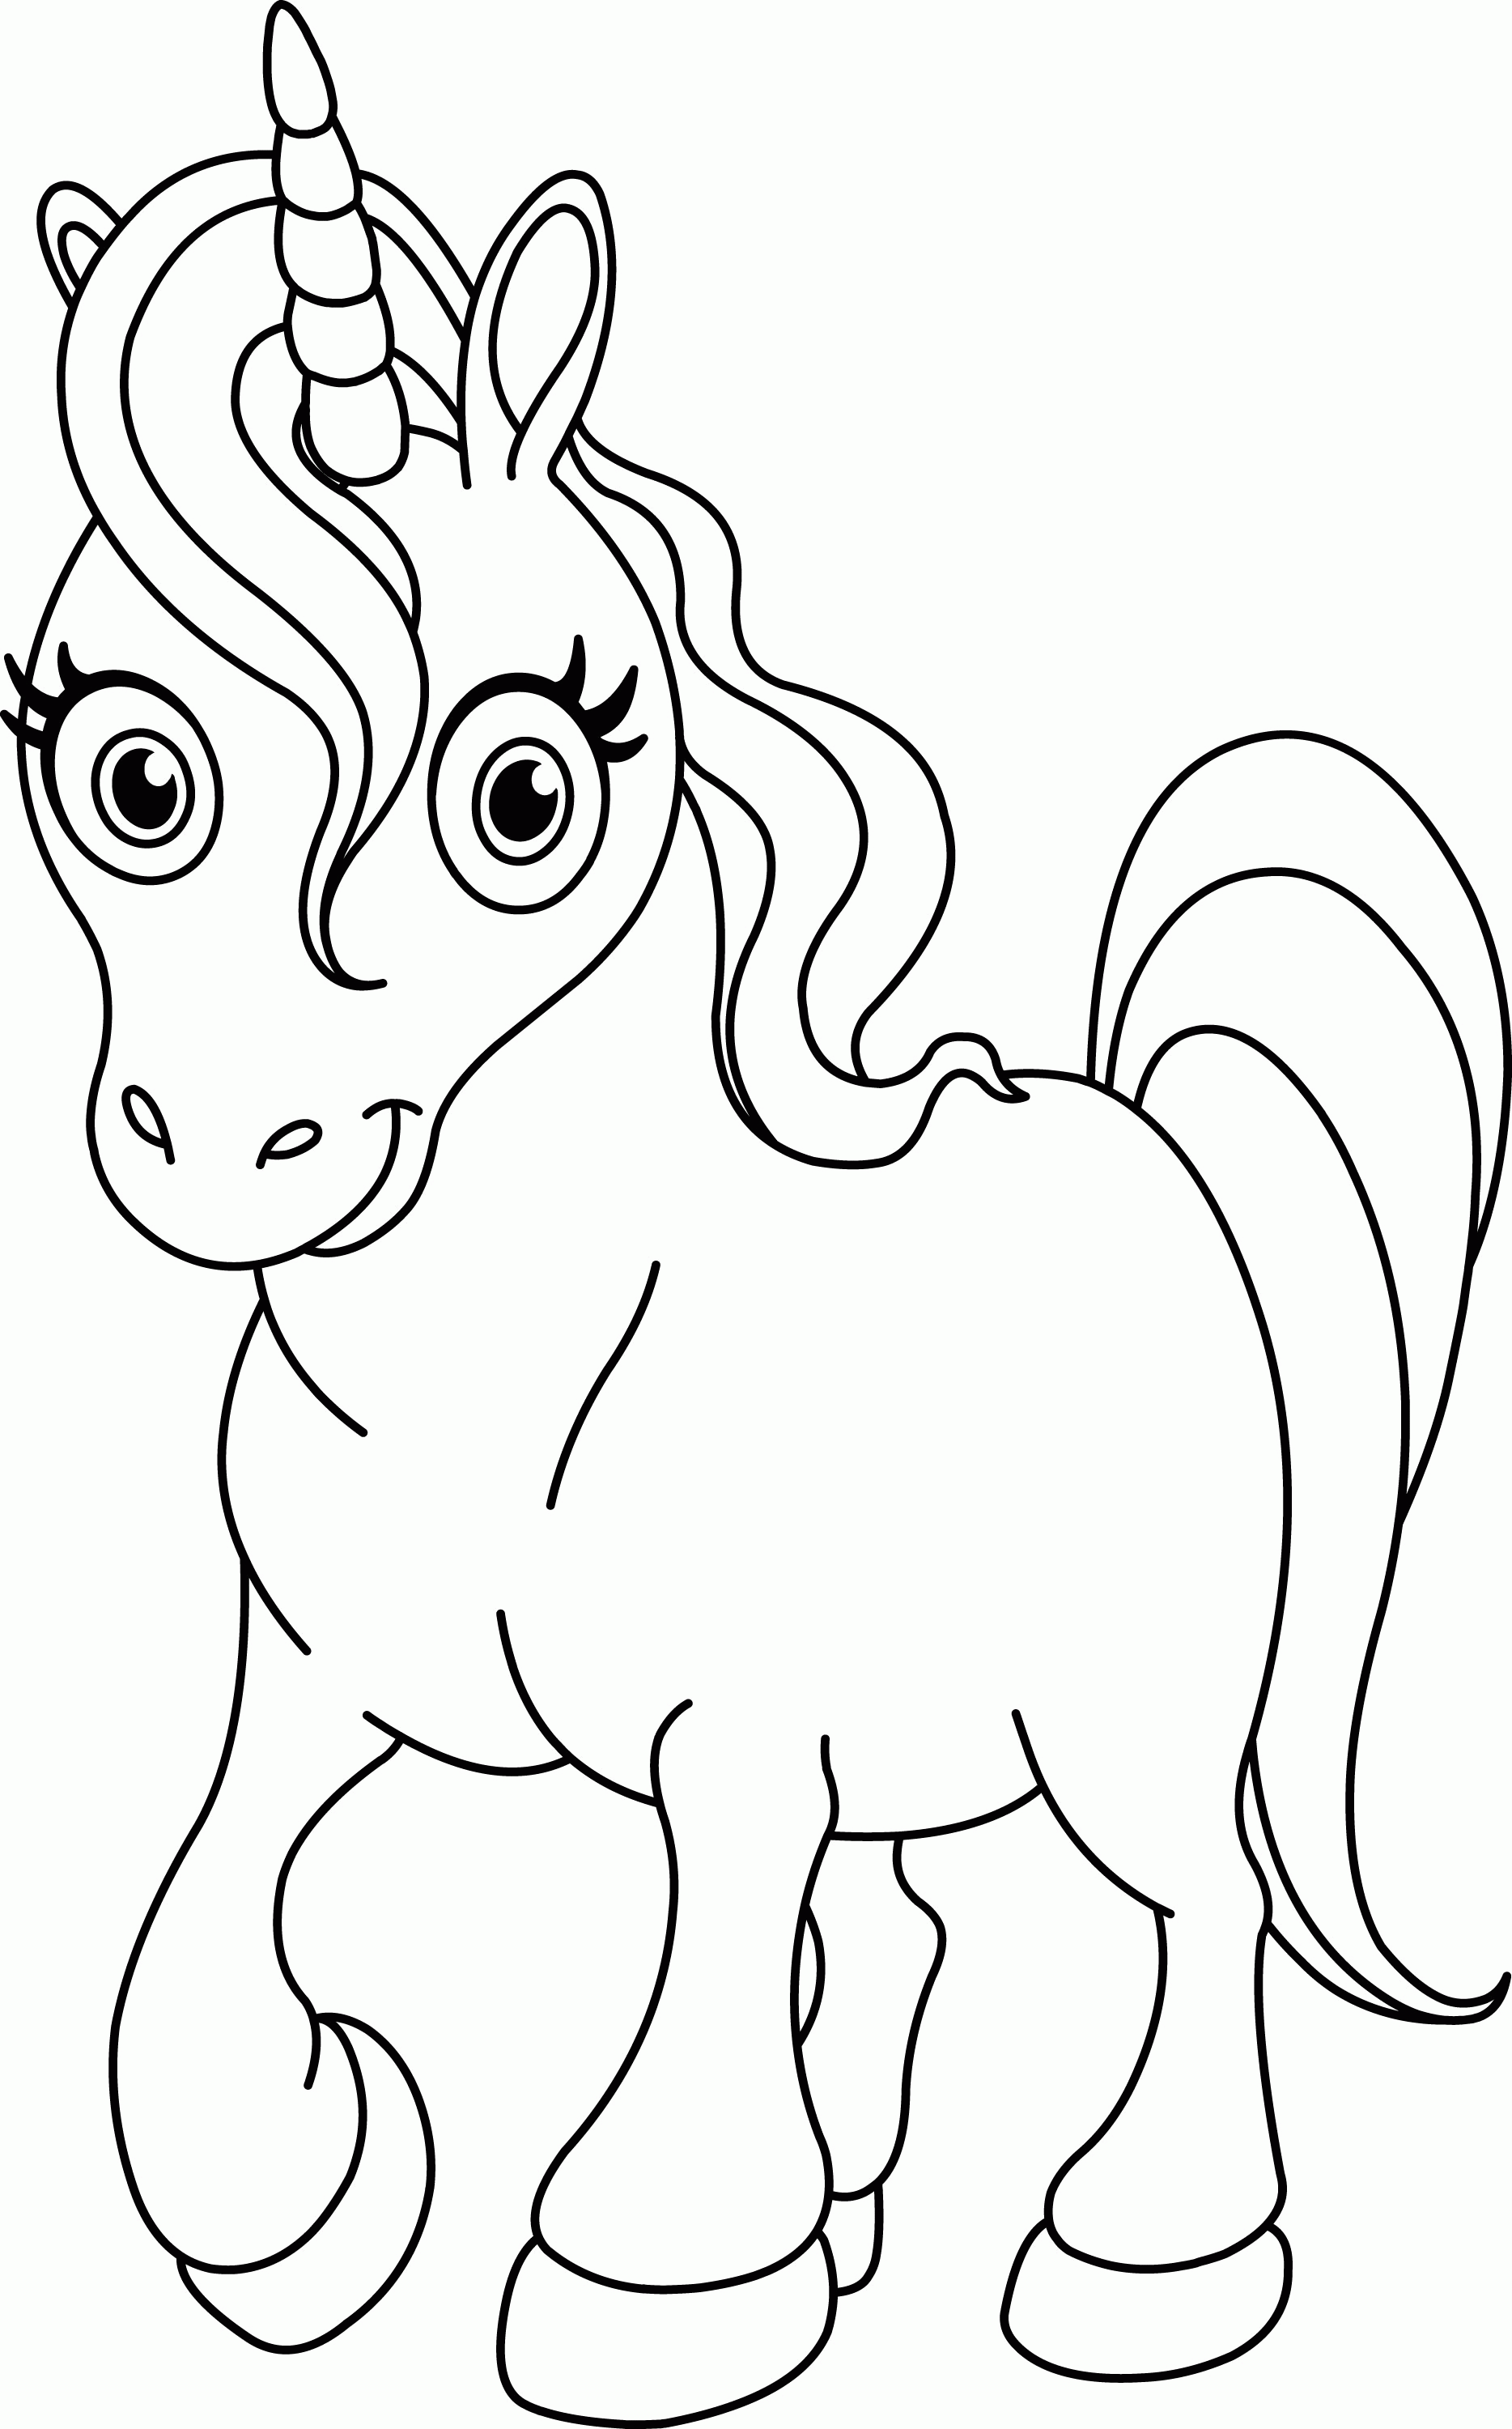 Free Printable Unicorn Coloring Page, Download Free